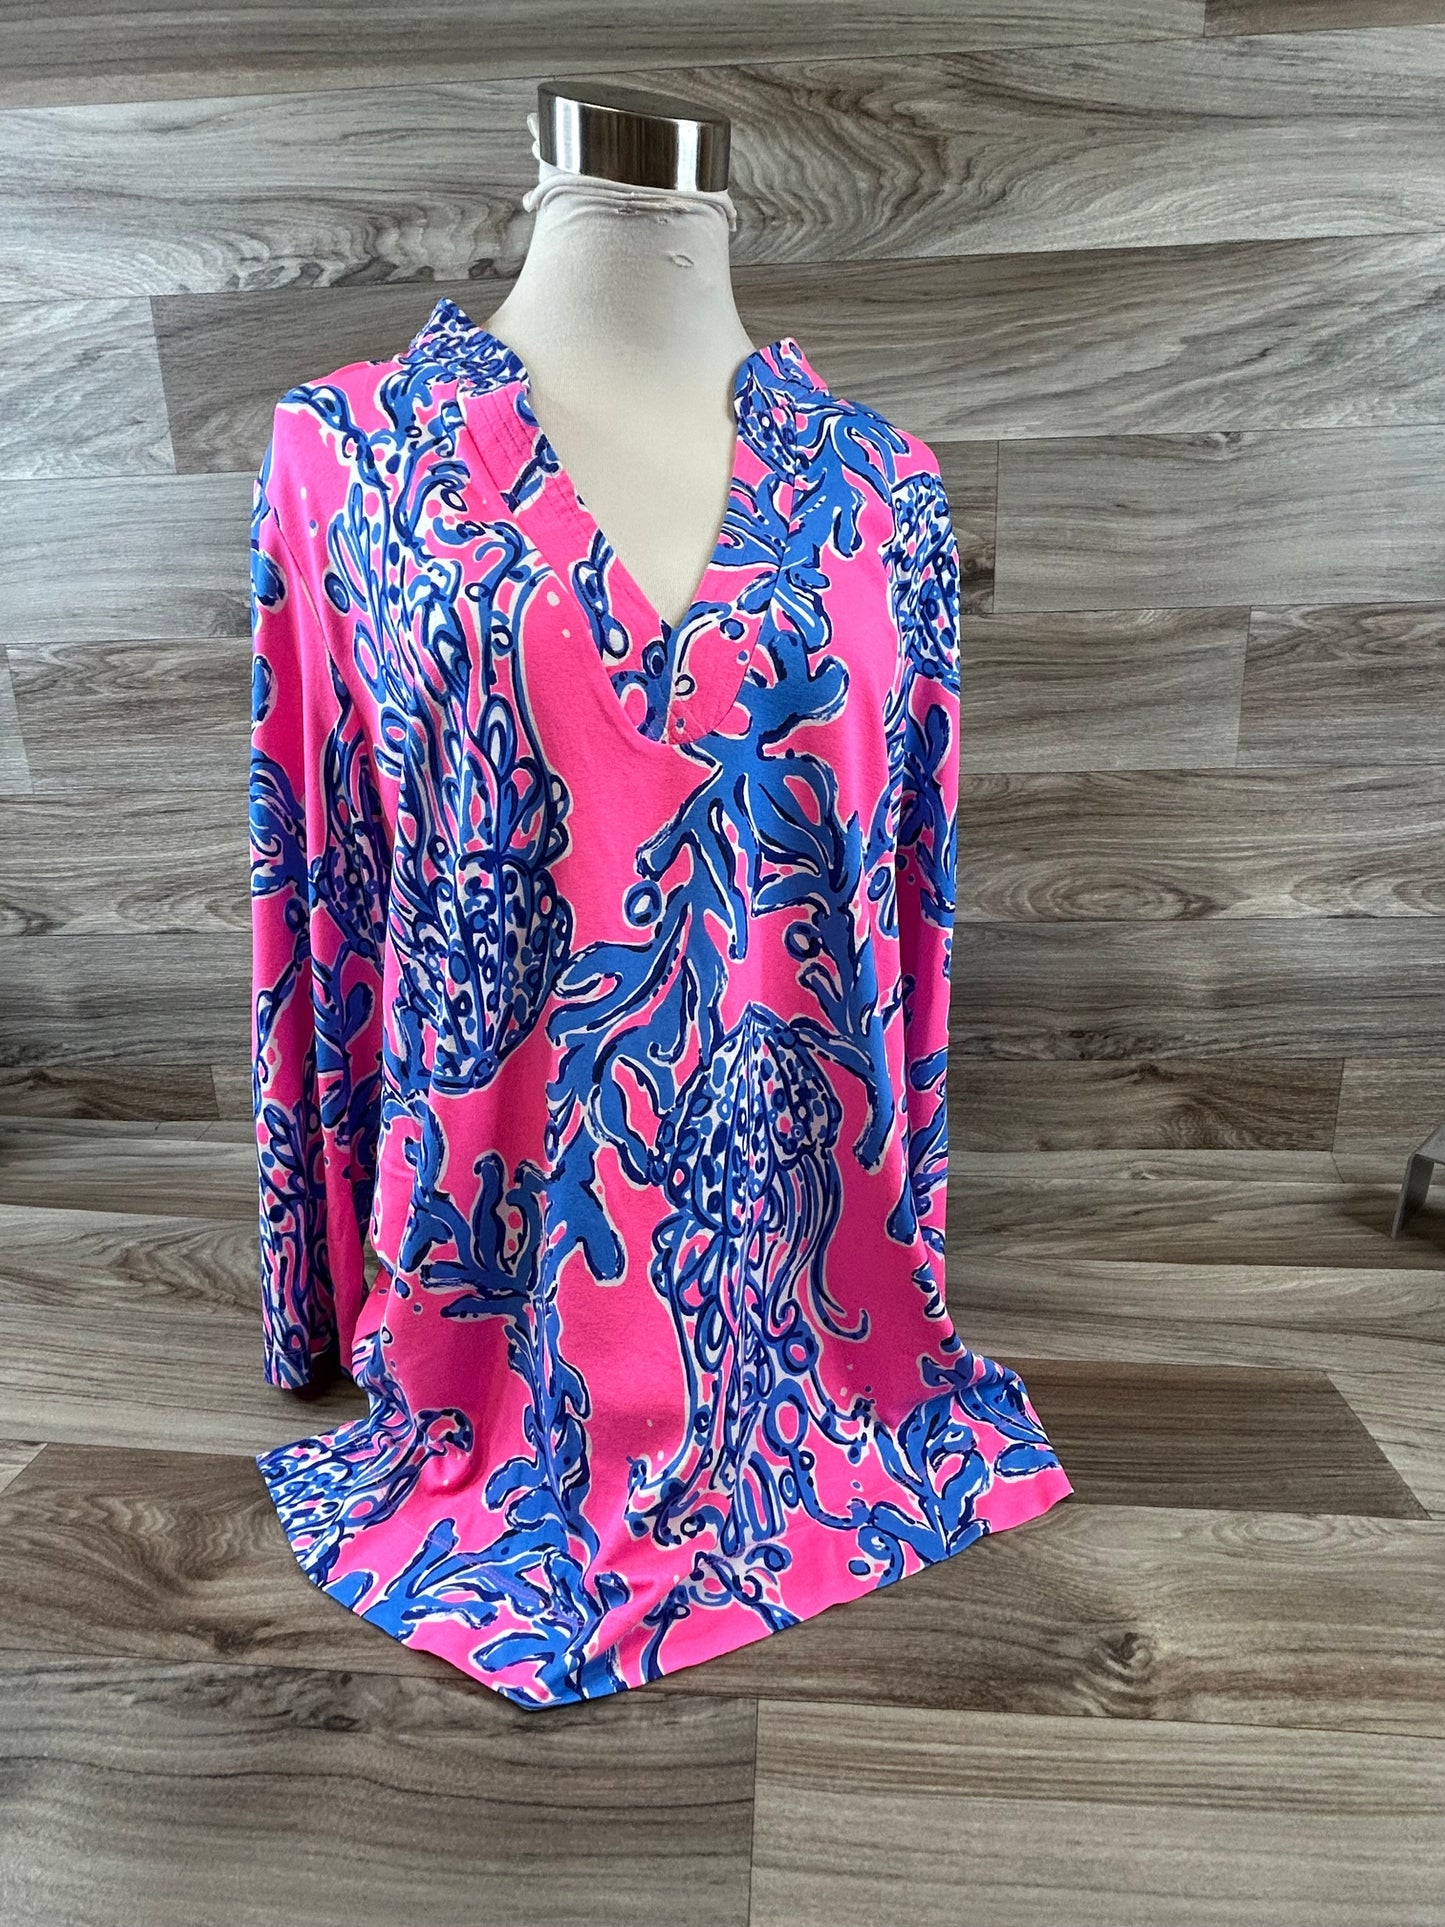 Blue & Pink Top Long Sleeve Designer Lilly Pulitzer, Size Xl